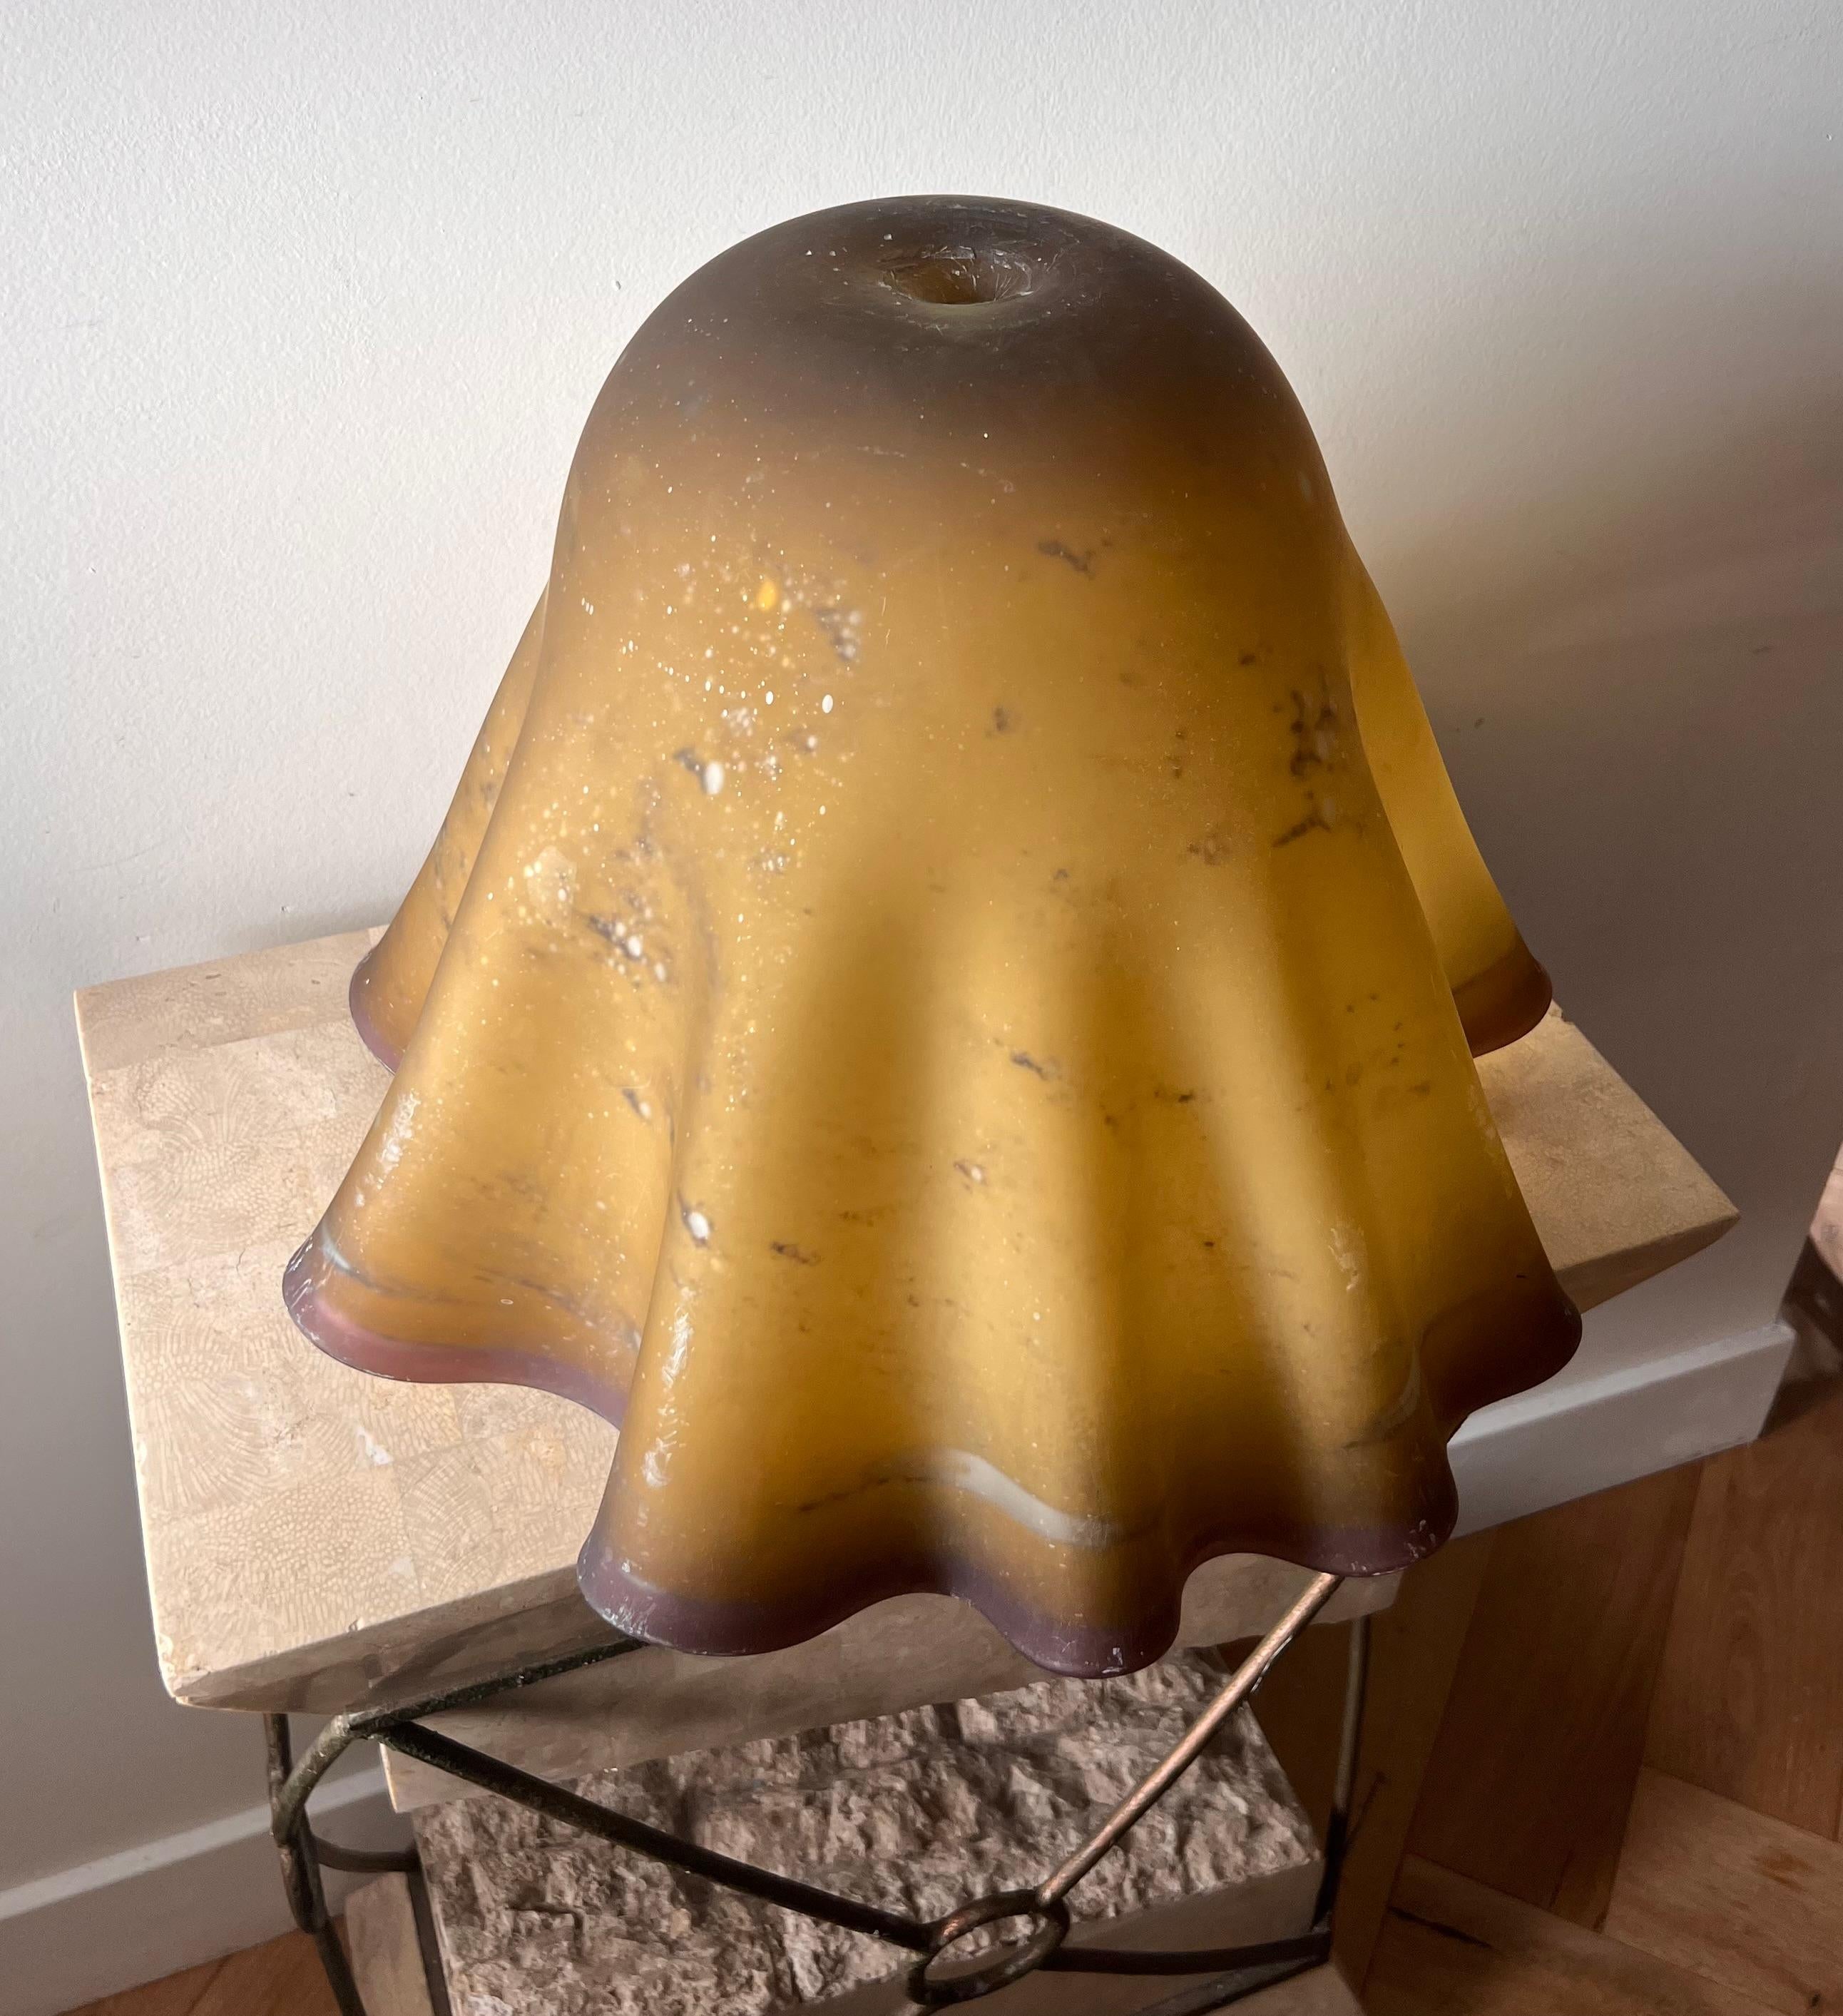 A very unique trompe l’œil art glass lamp shade, mid 20th century. Tones of mustard and mauve, and featuring a voluptuous oyster edge in undulating pattern. Some wear and tear but no glaring flaws. Please note this is only the shade - no lamp base.